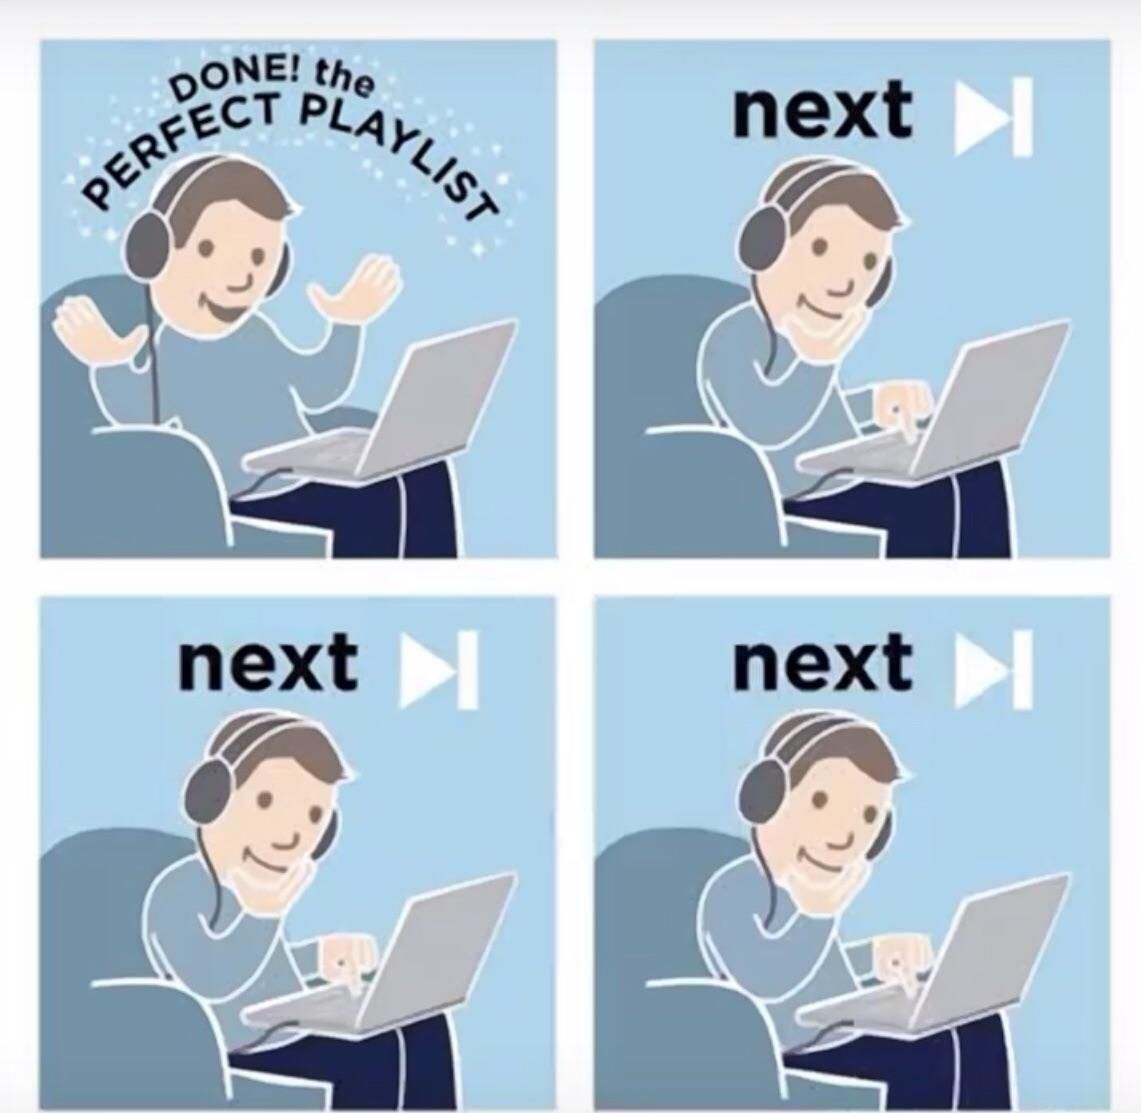 Me every ***ing time I try to make a playlist